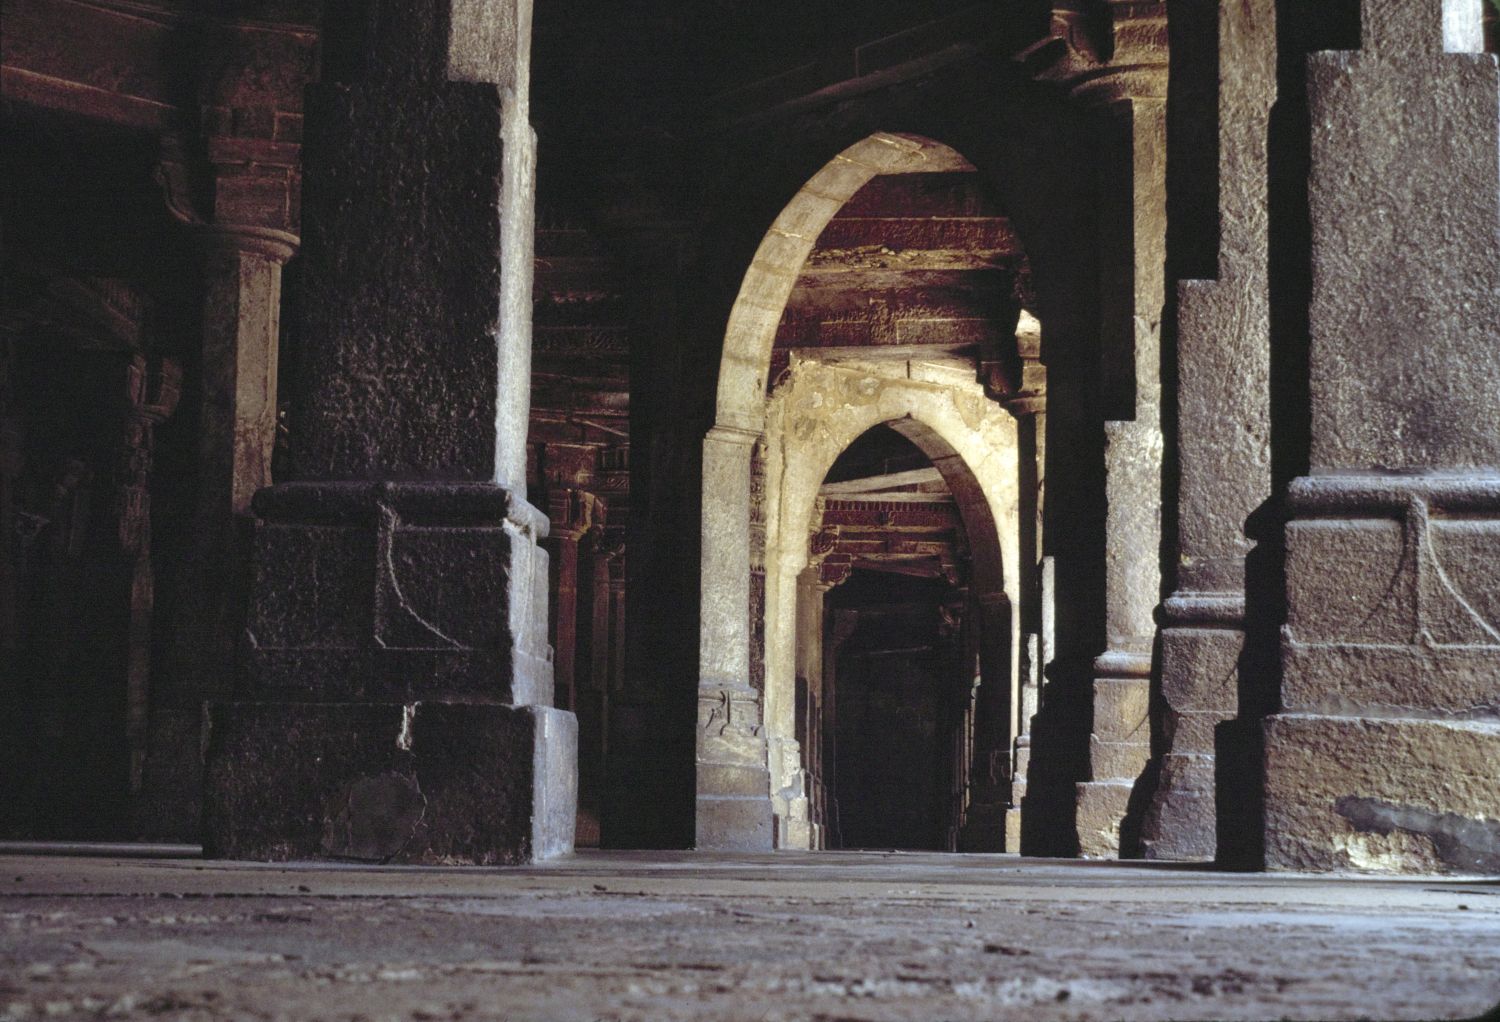 Interior of prayer hall, showing bases of pilars and arches.